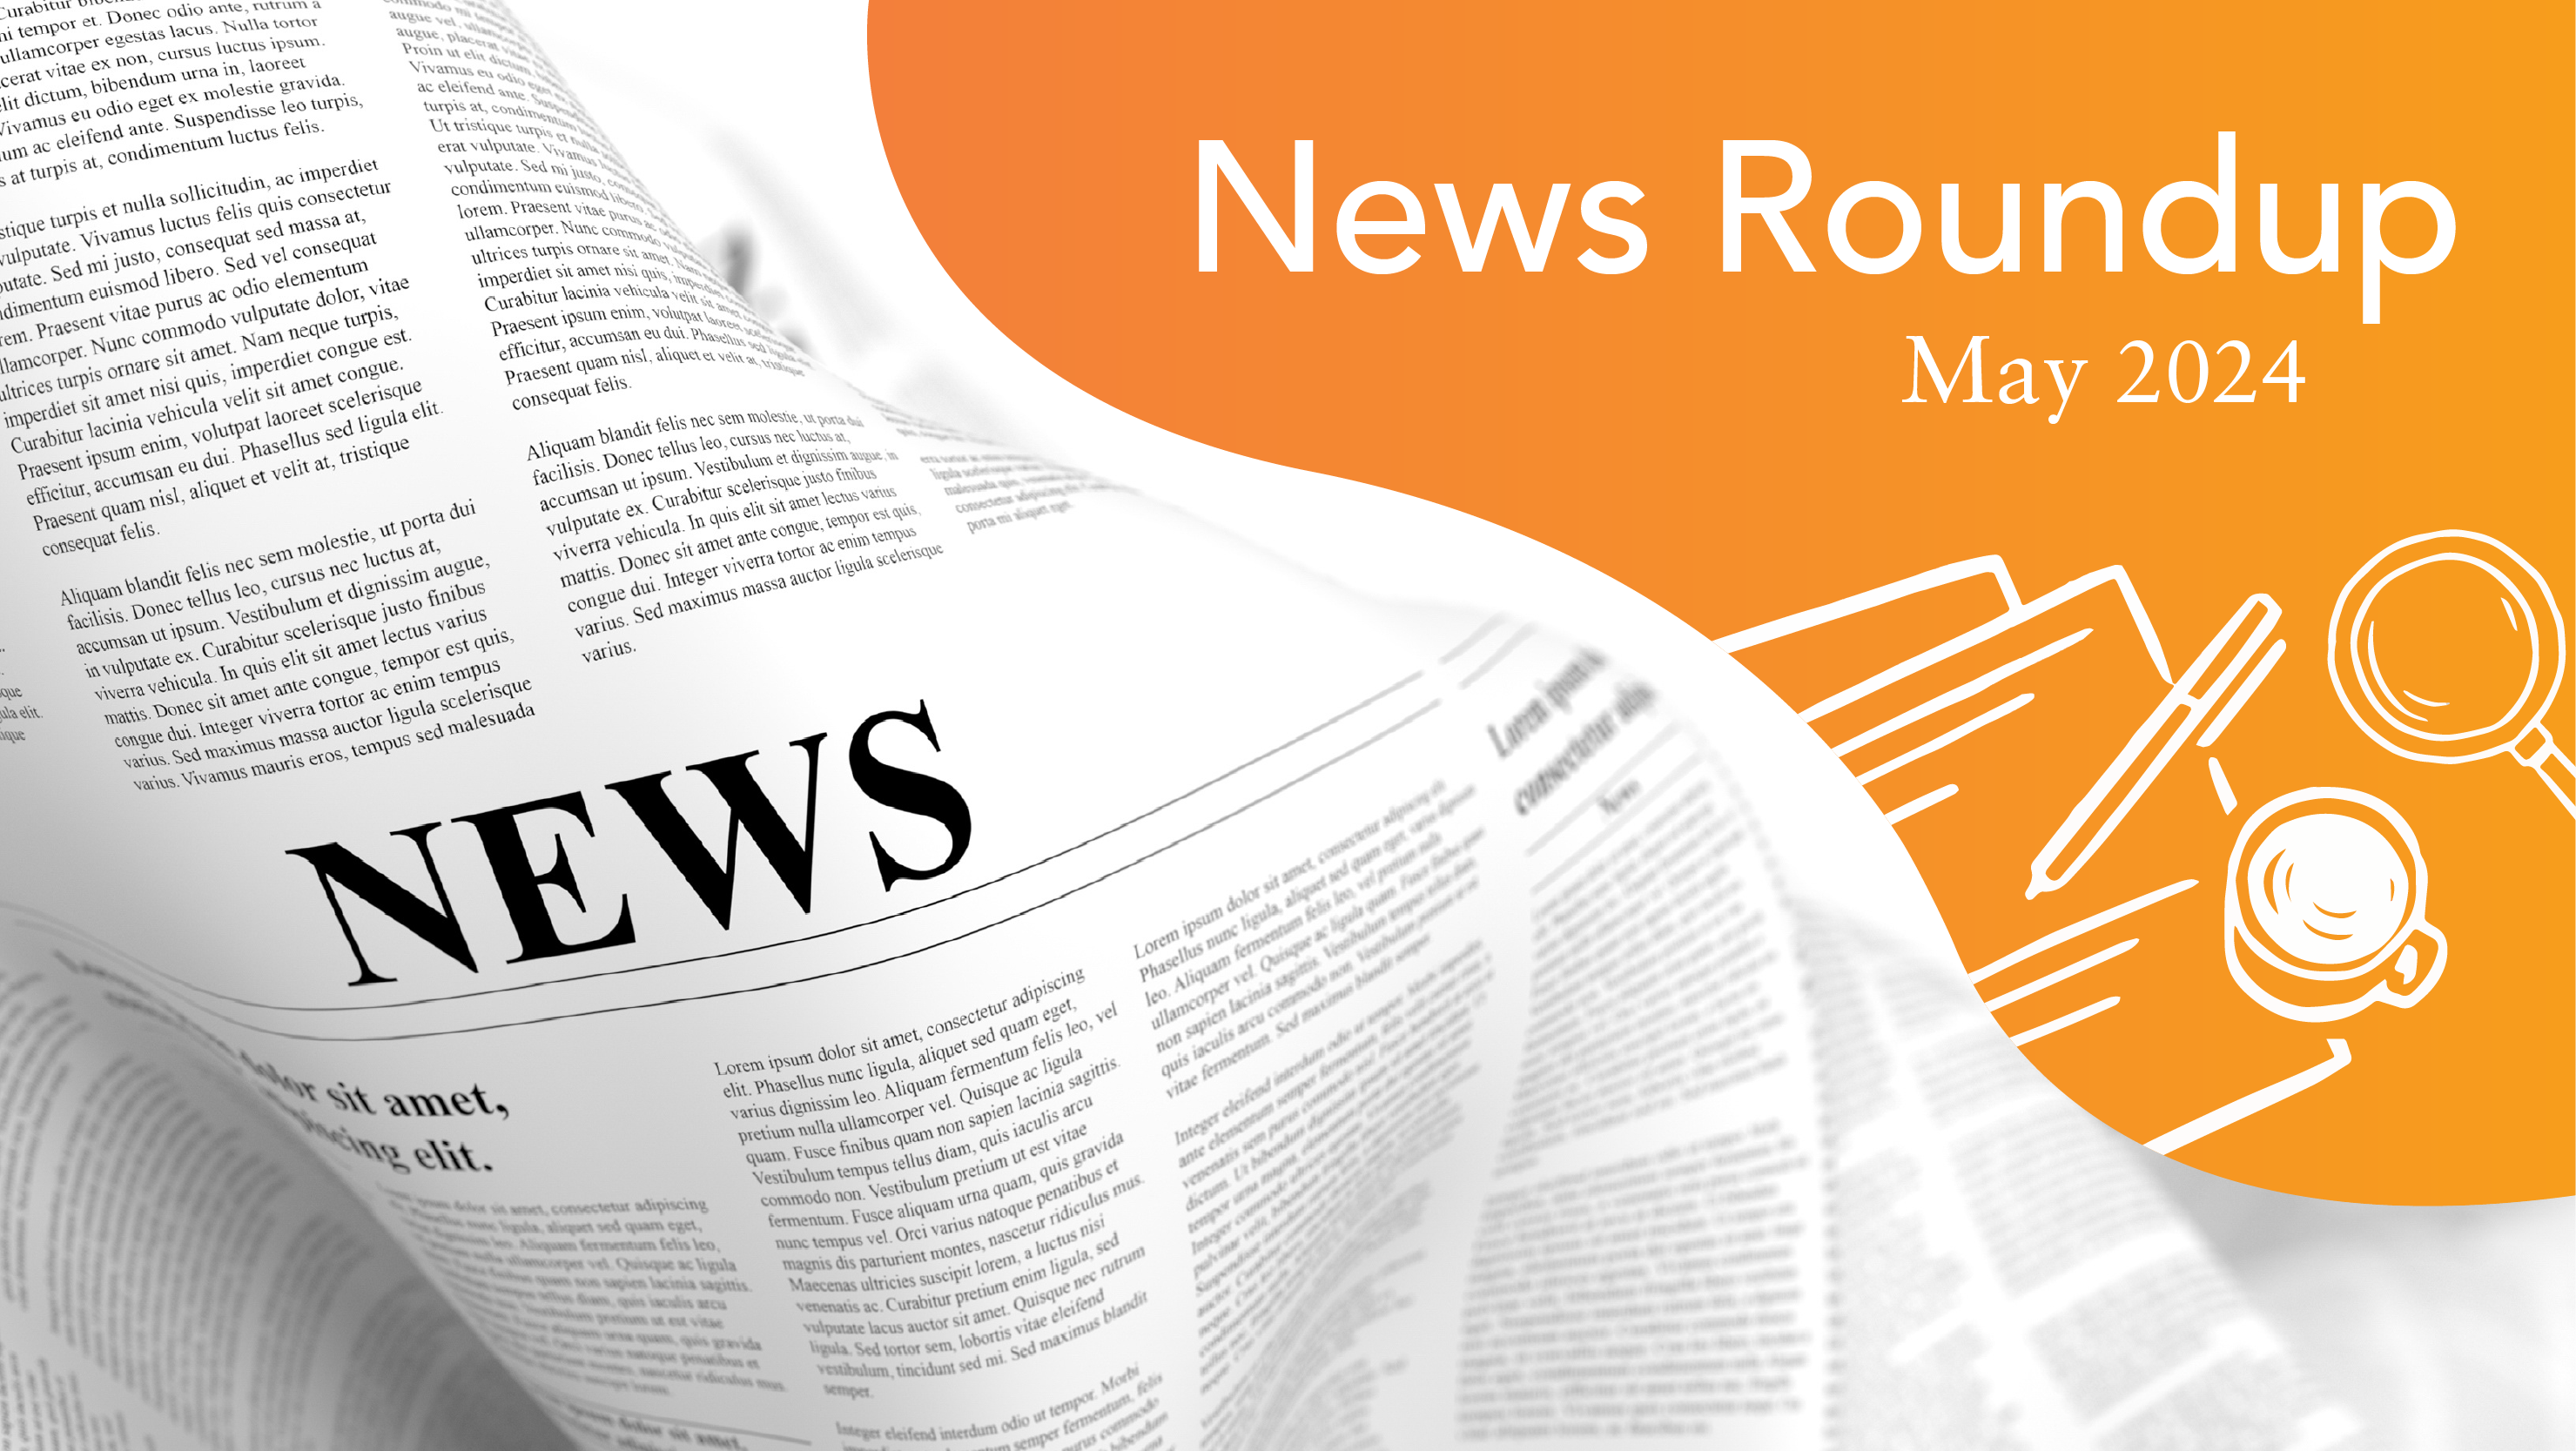 A newspaper and an orange banner with the copy "News Roundup May 2024"